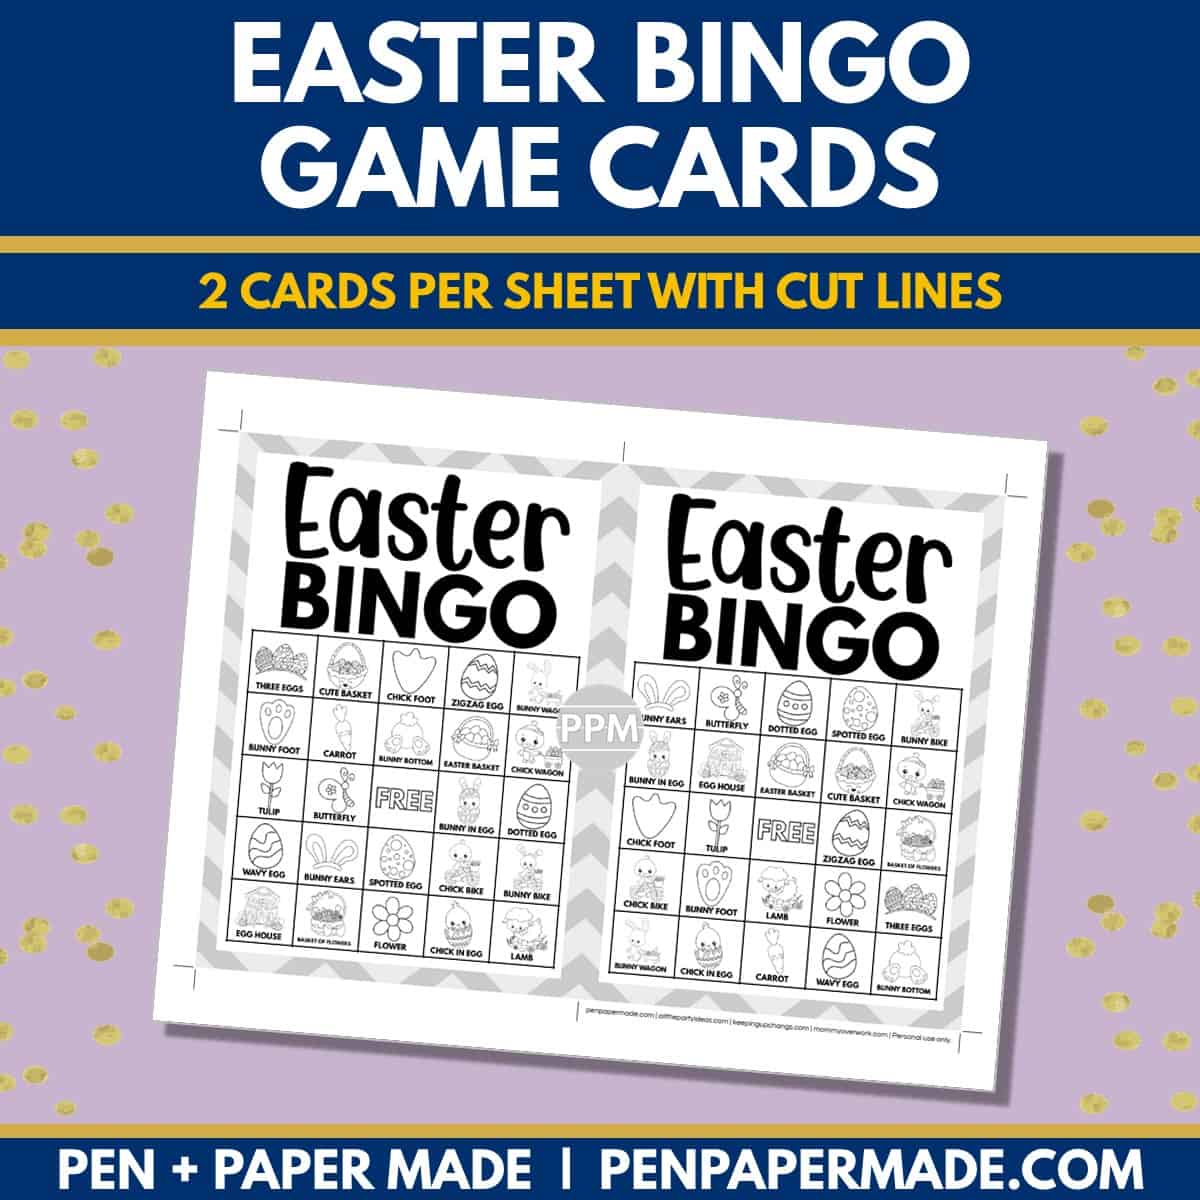 easter bingo card 5x5 5x7 game boards with black white images and text words for coloring.